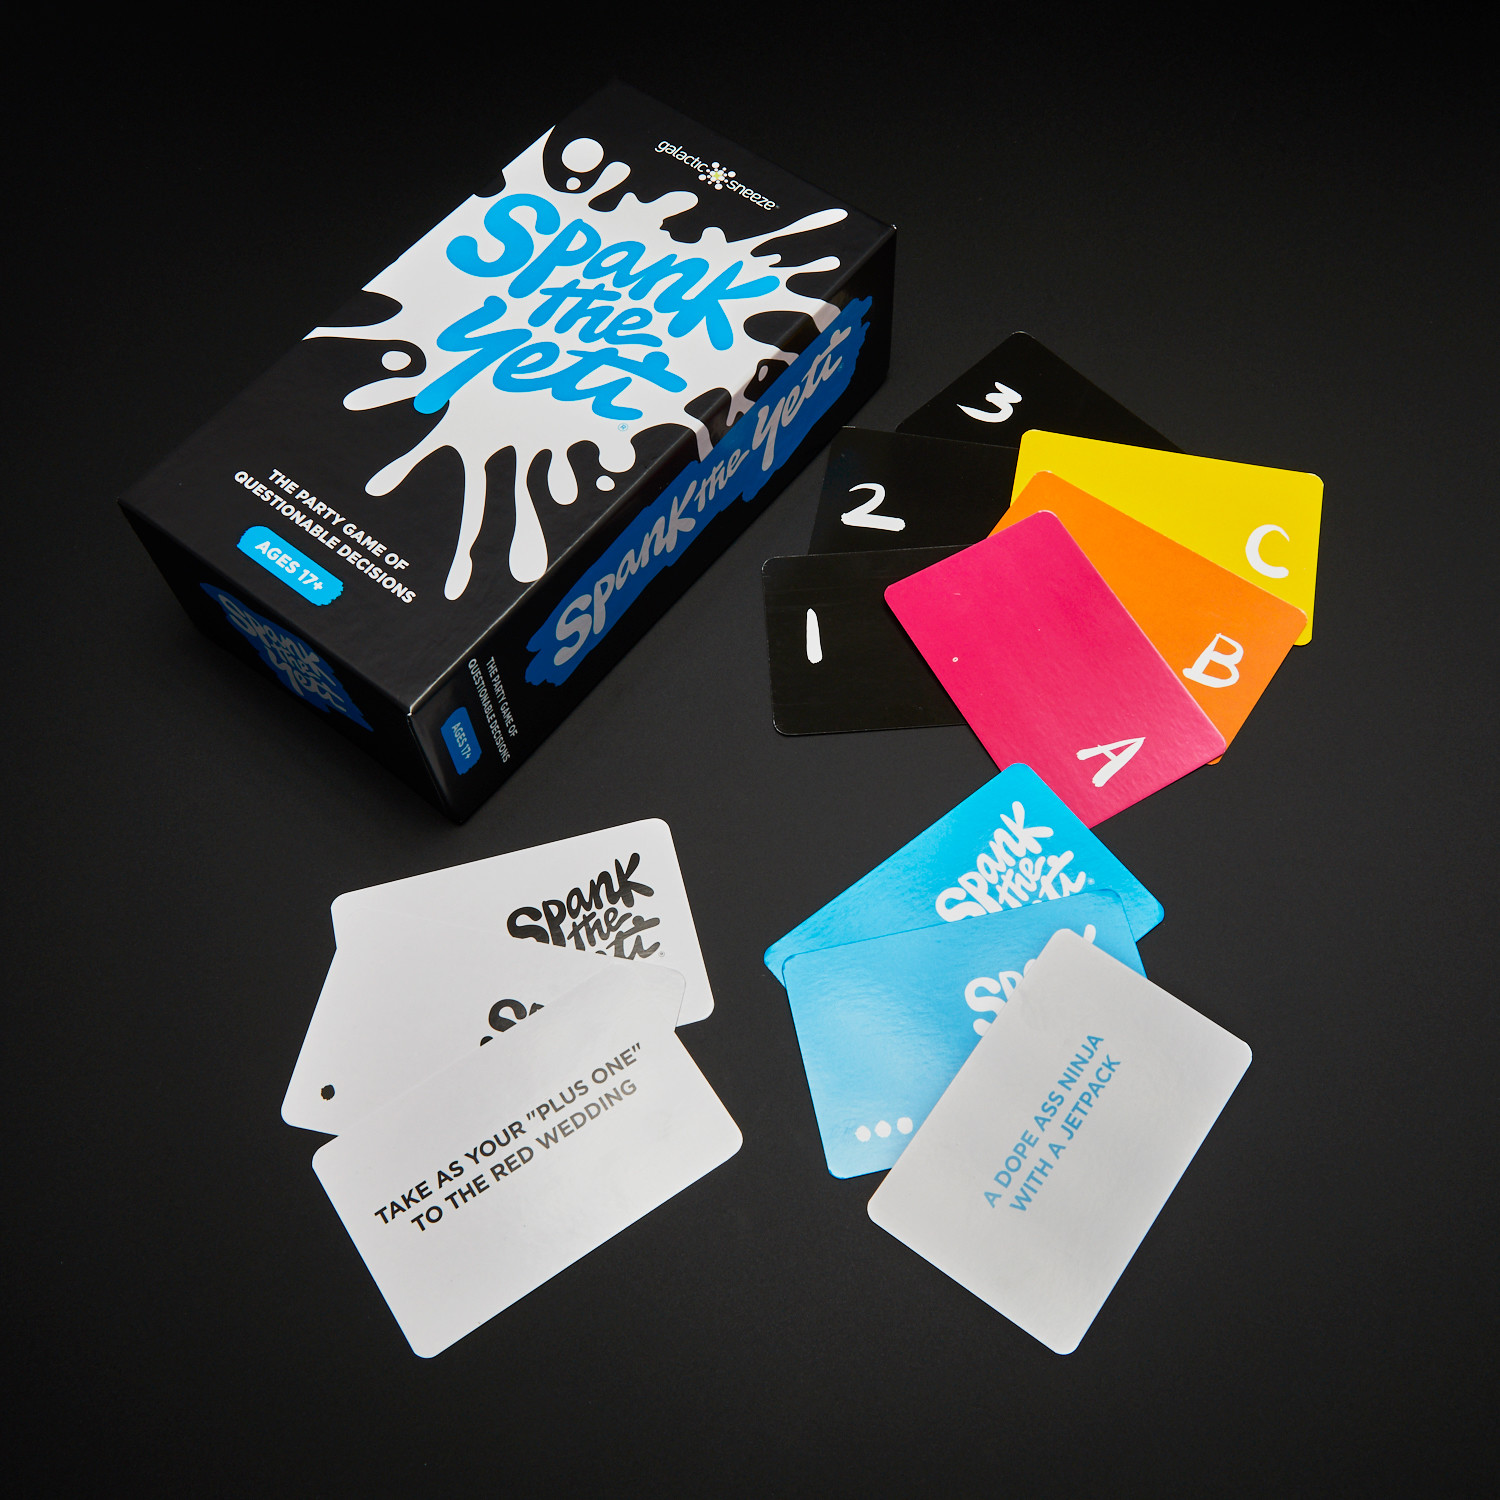  Galactic Sneeze Spank The Yeti: The Party Game of